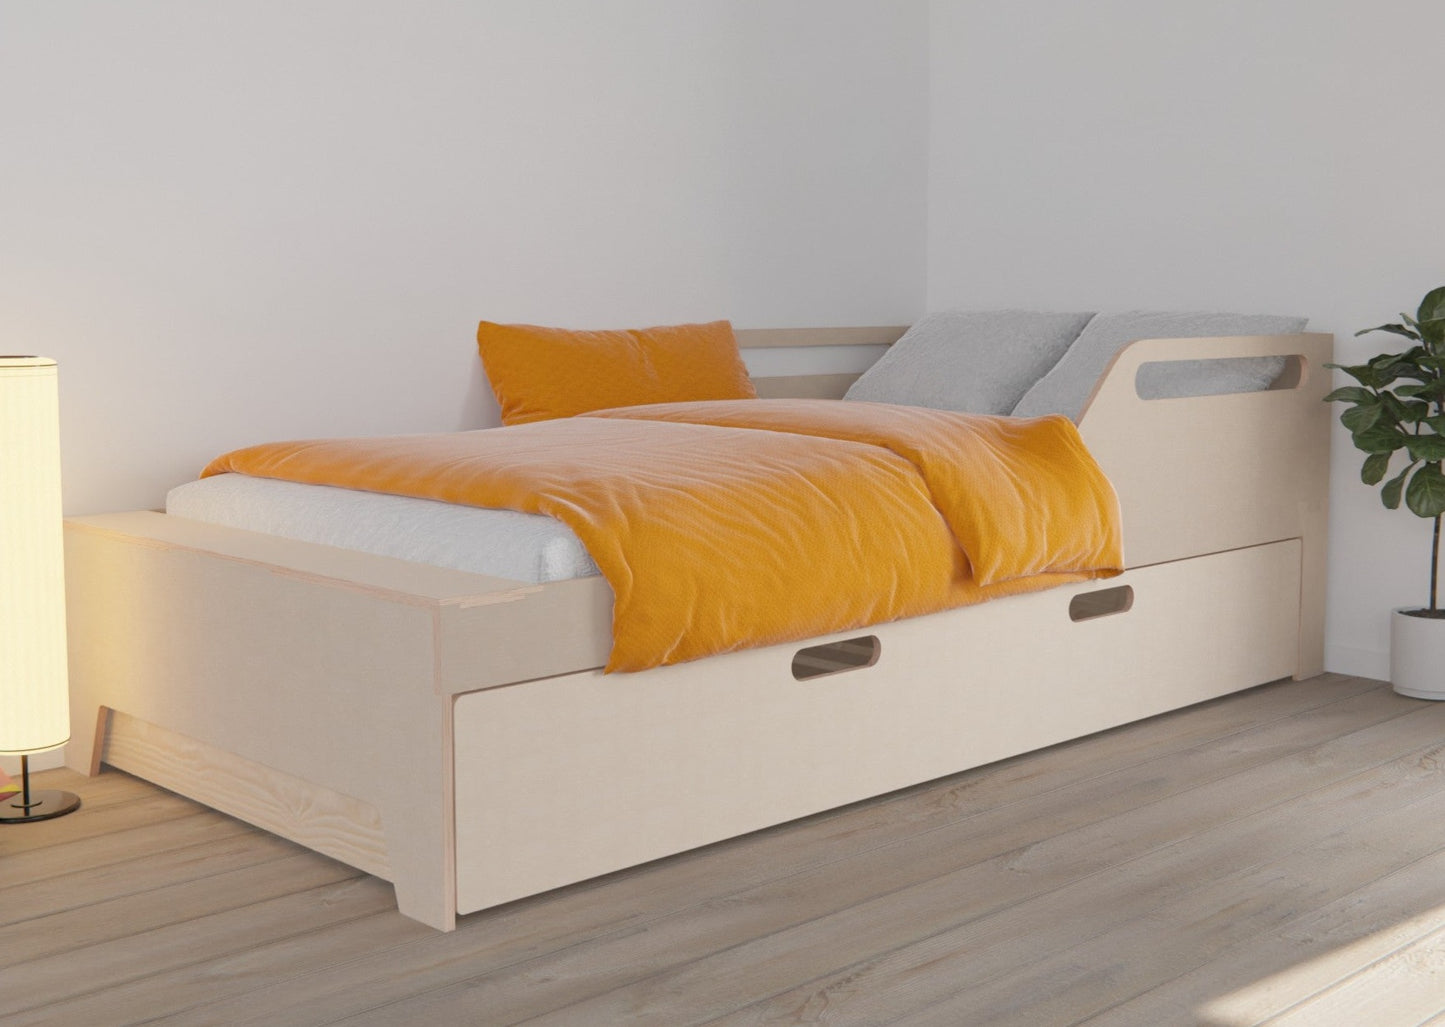 Elegant wooden bed frame with trundle bed, perfect for saving space and accommodating guests. Craftsmanship at its finest.